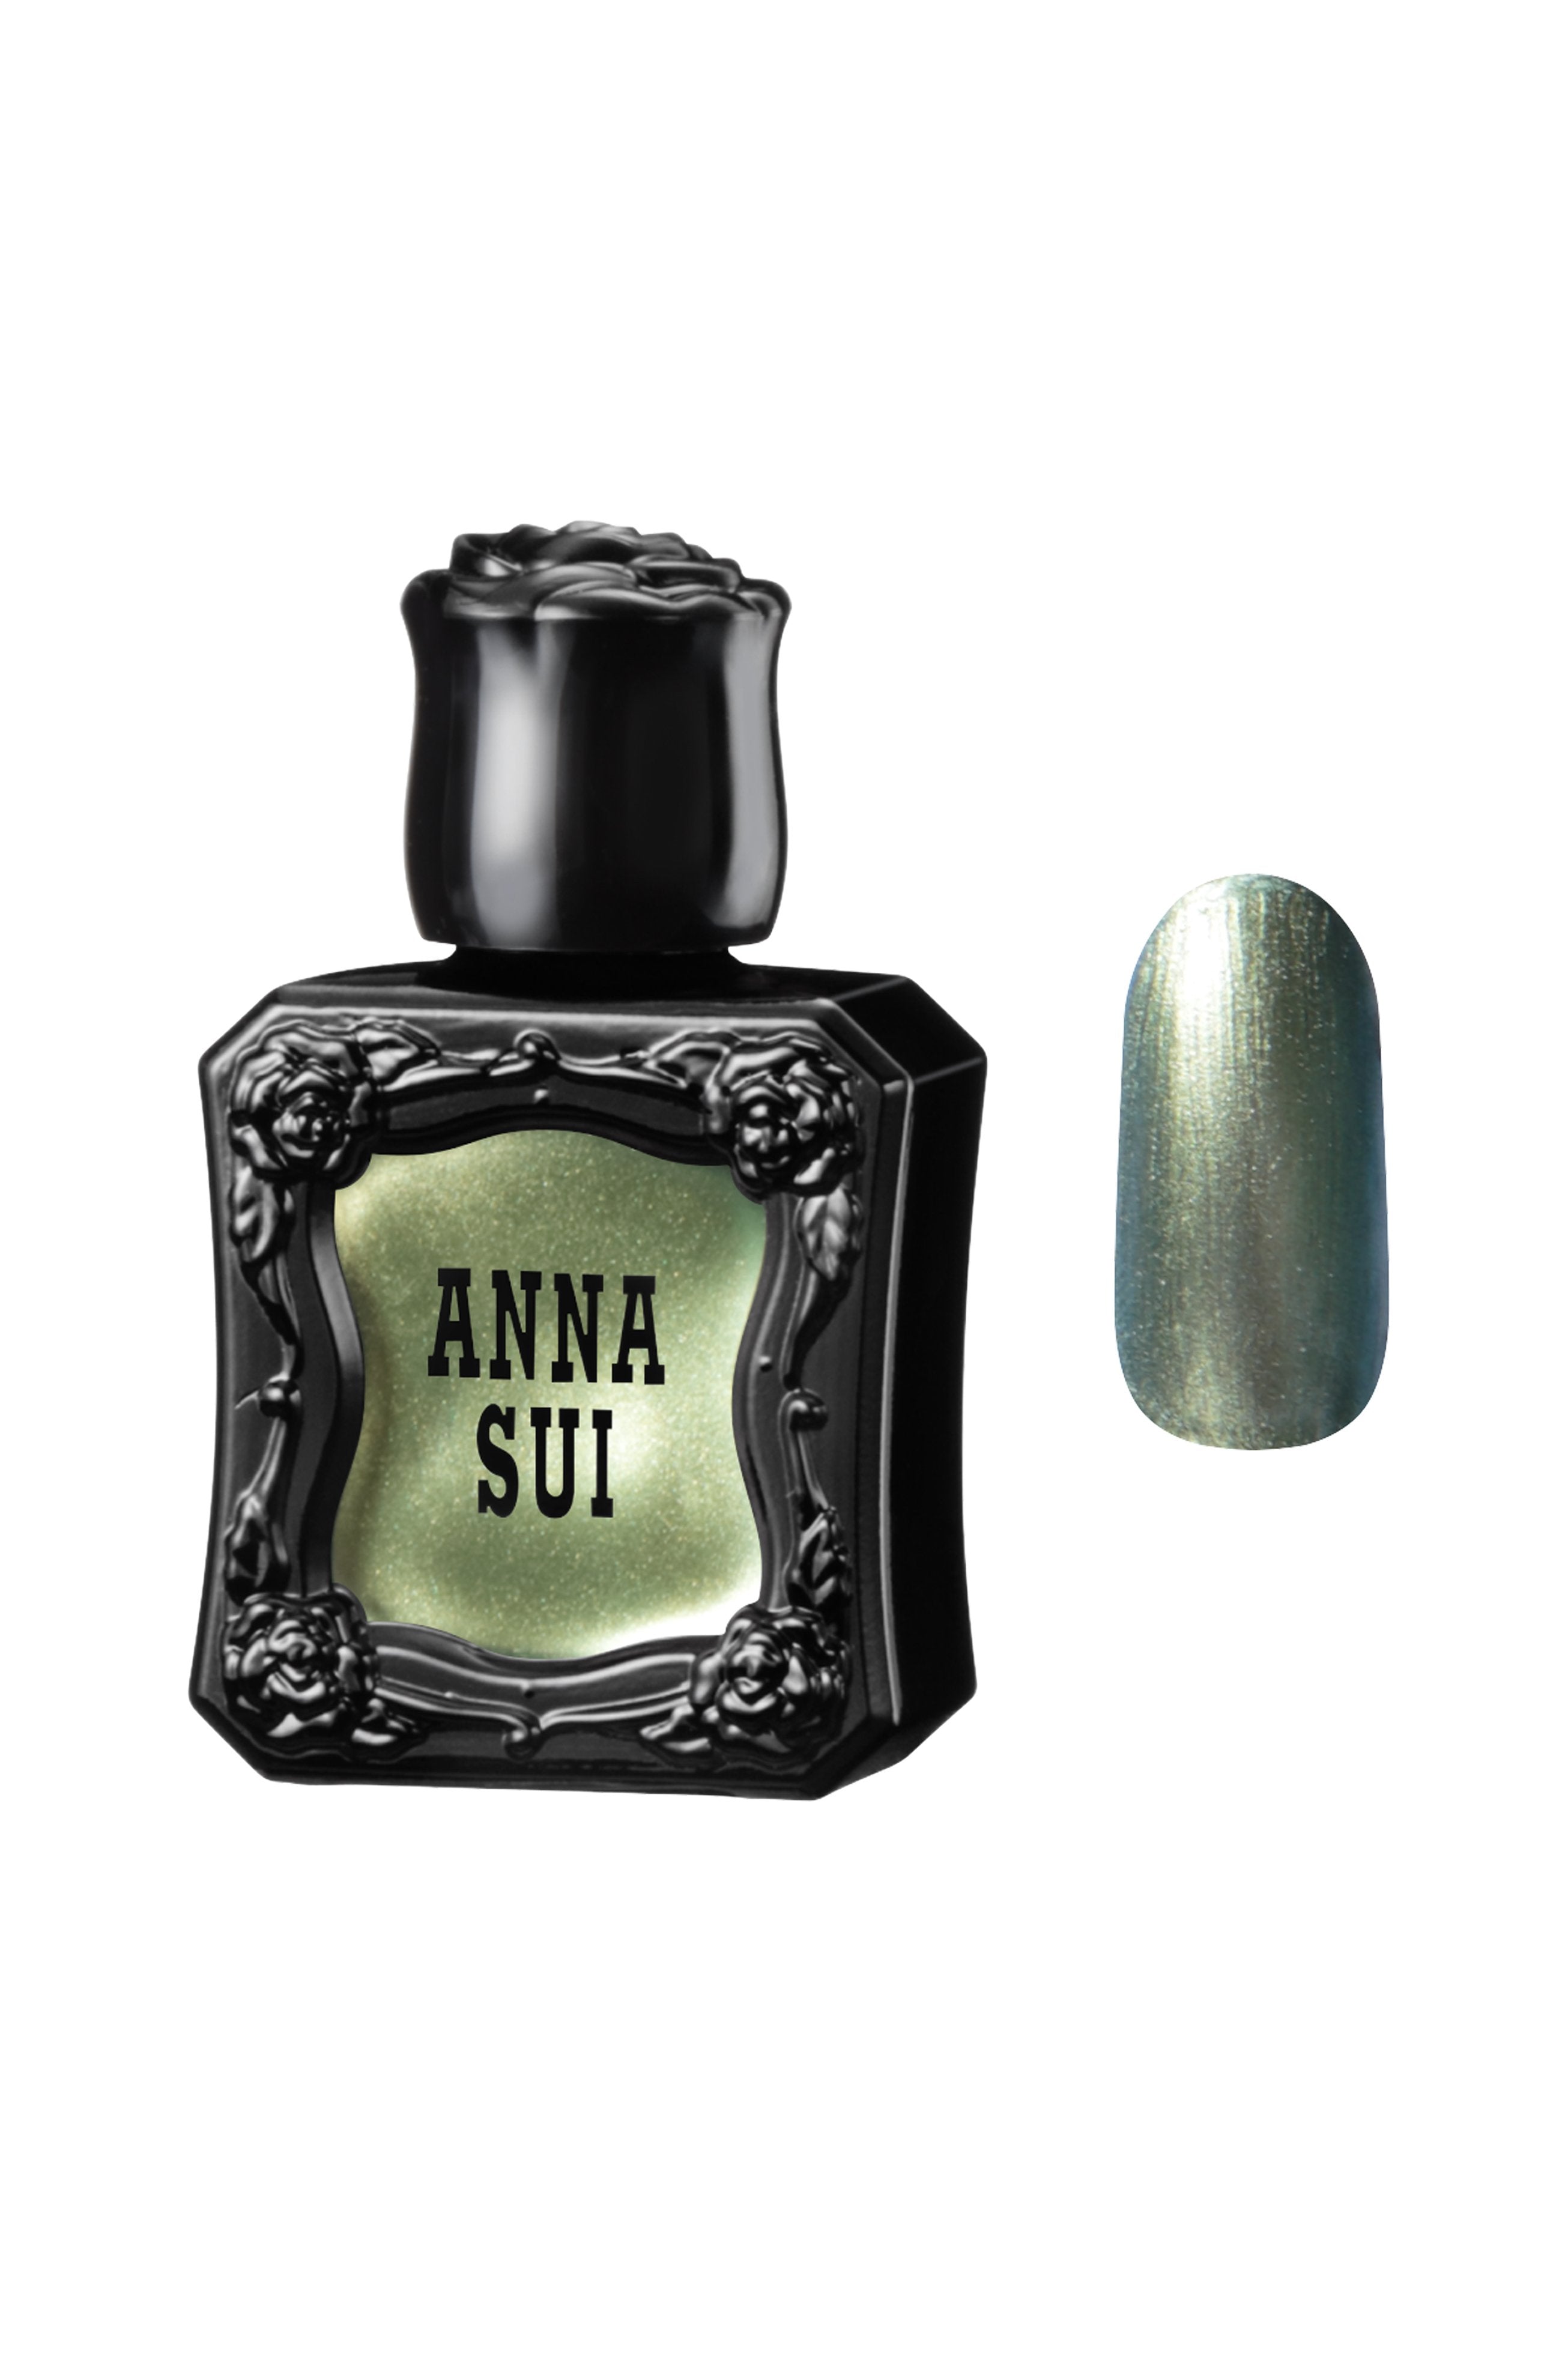 METALLIC PISTACHIO Nail Polish bottles, with raised rose pattern, Anna Sui in black over nail colors in bottle front